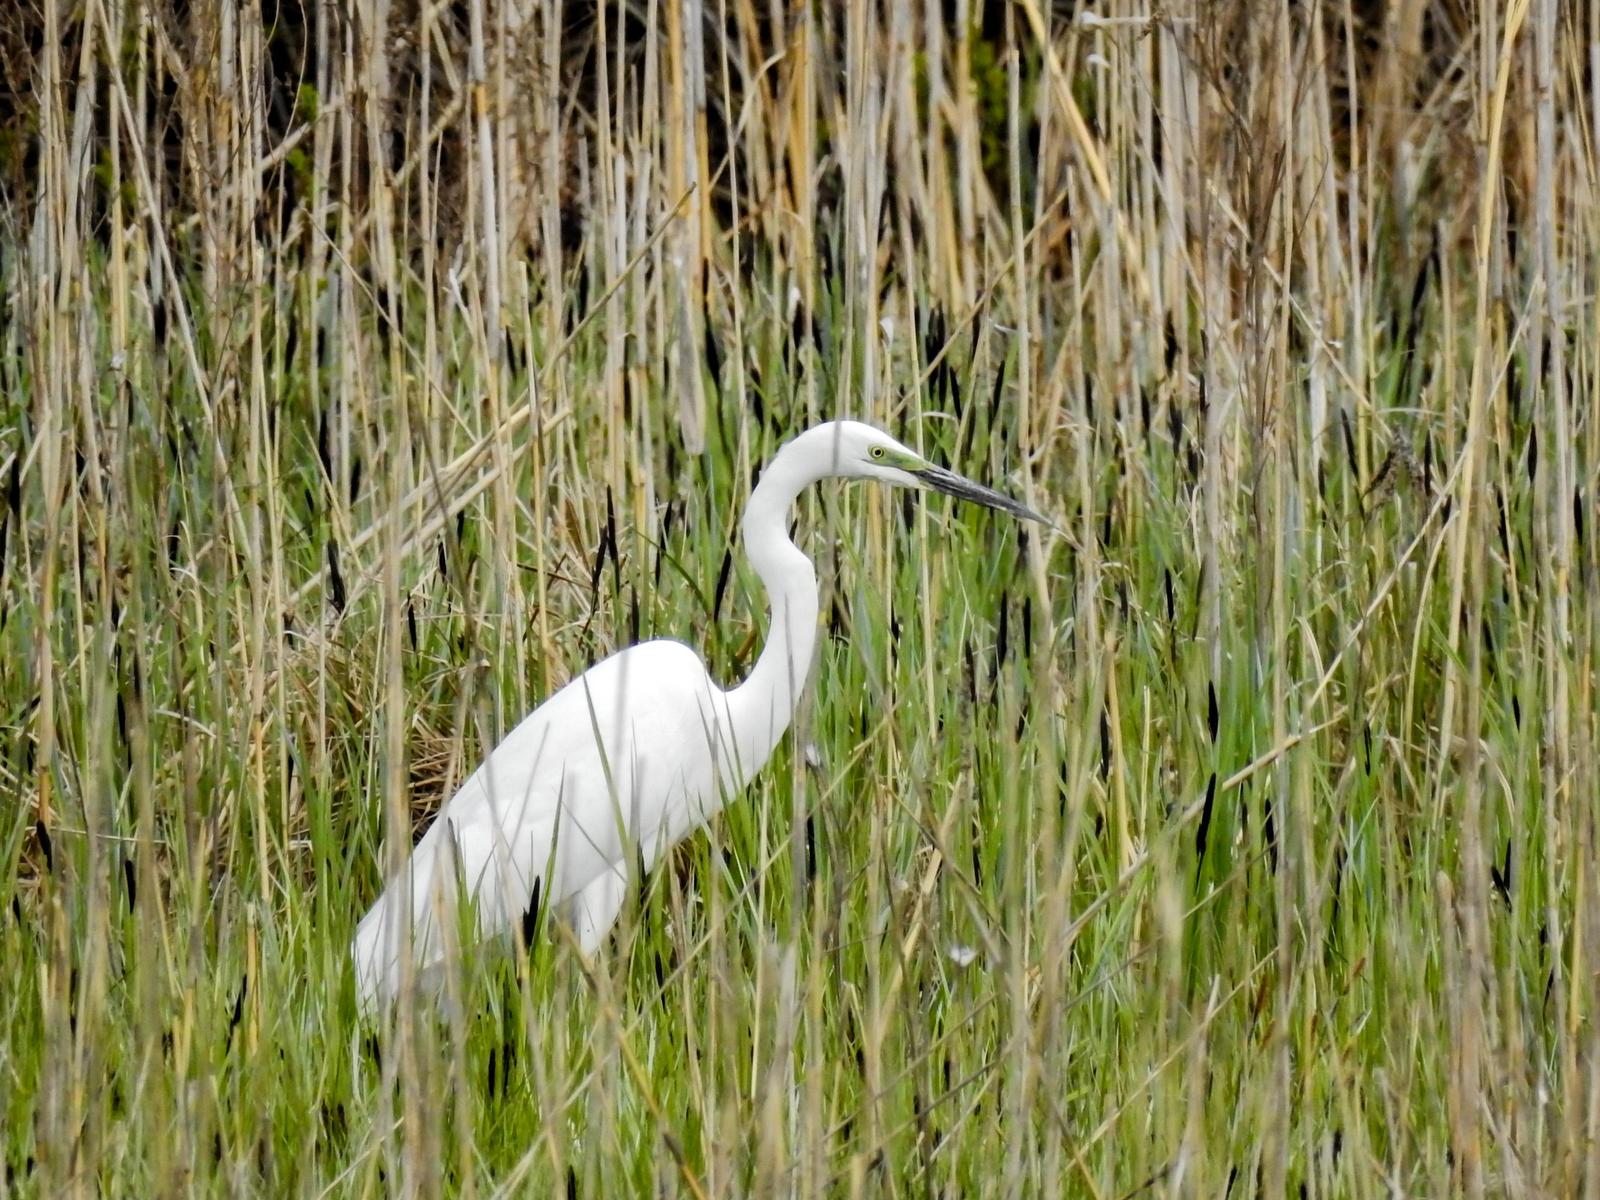 Great Egret Photo by African Googre